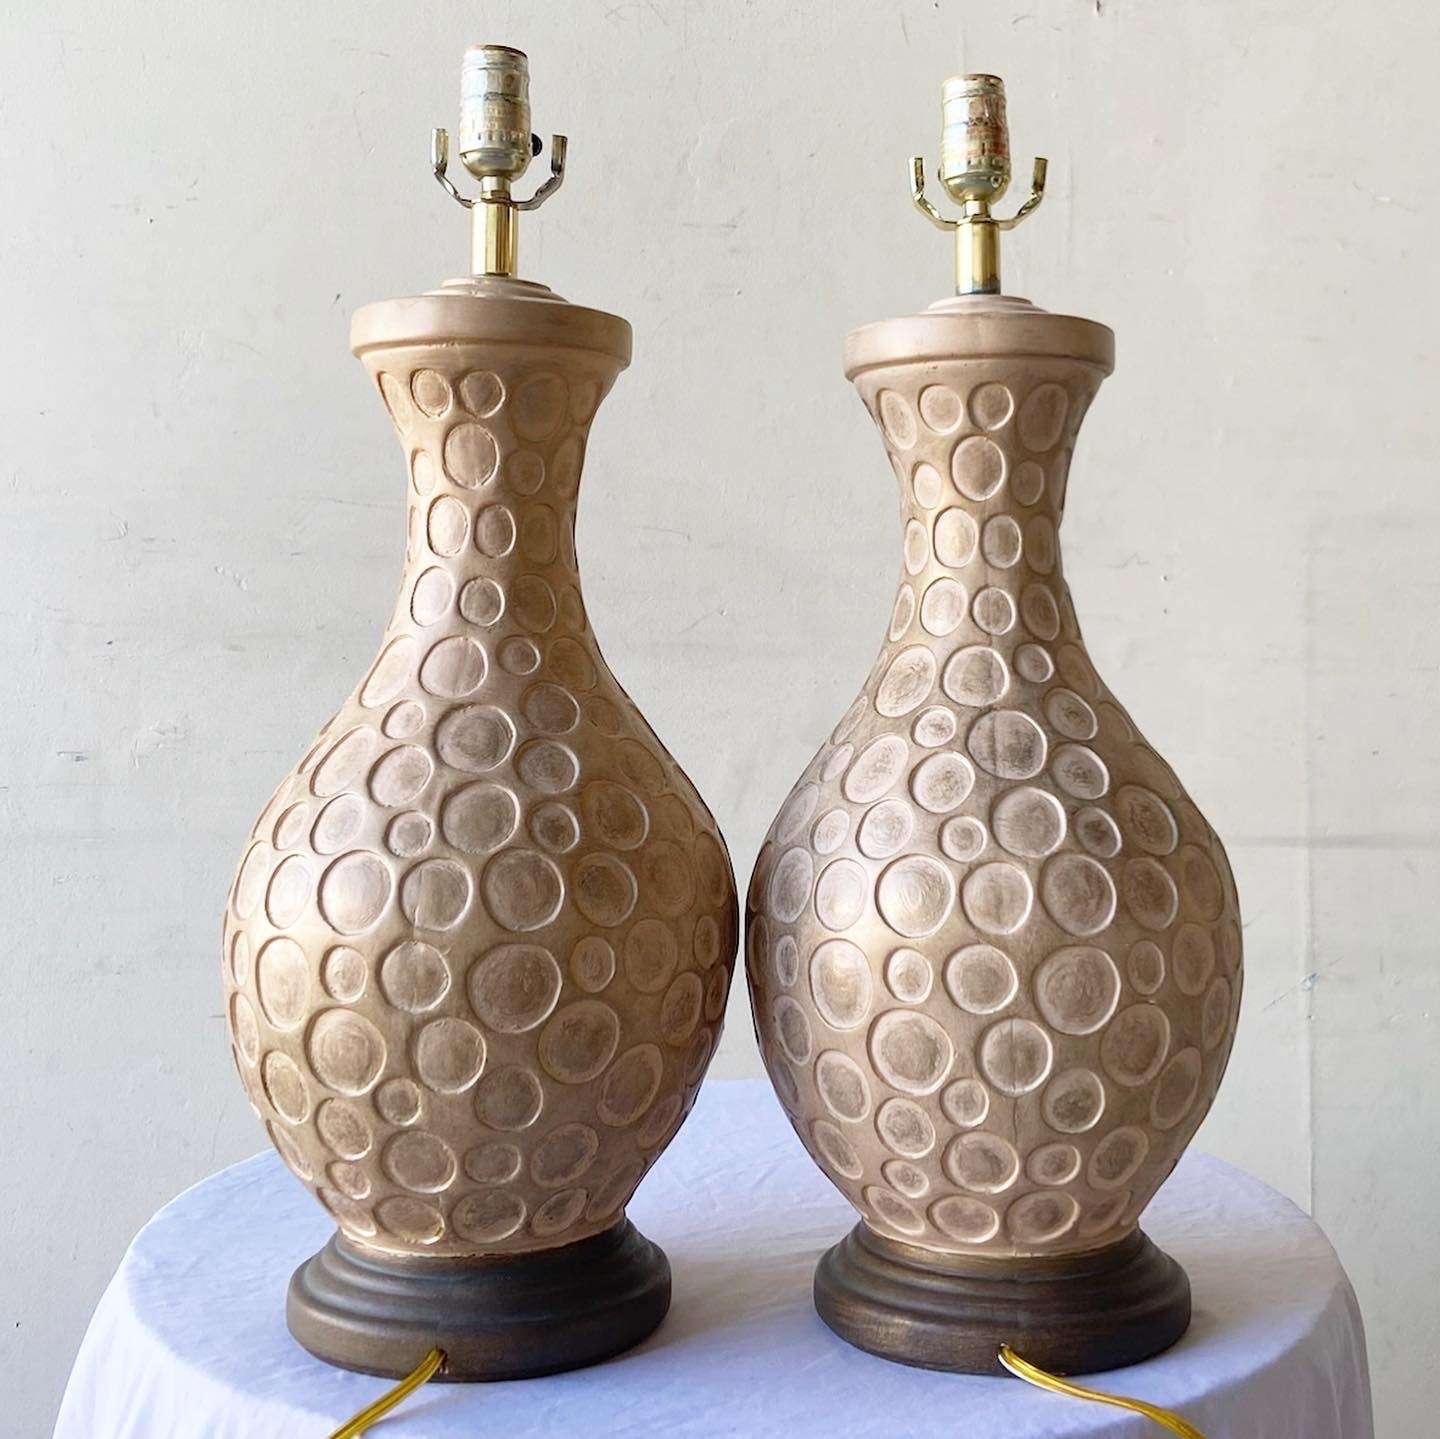 Post-Modern Postmodern Tan Ceramic Table Lamps on Wood Bases - a Pair For Sale